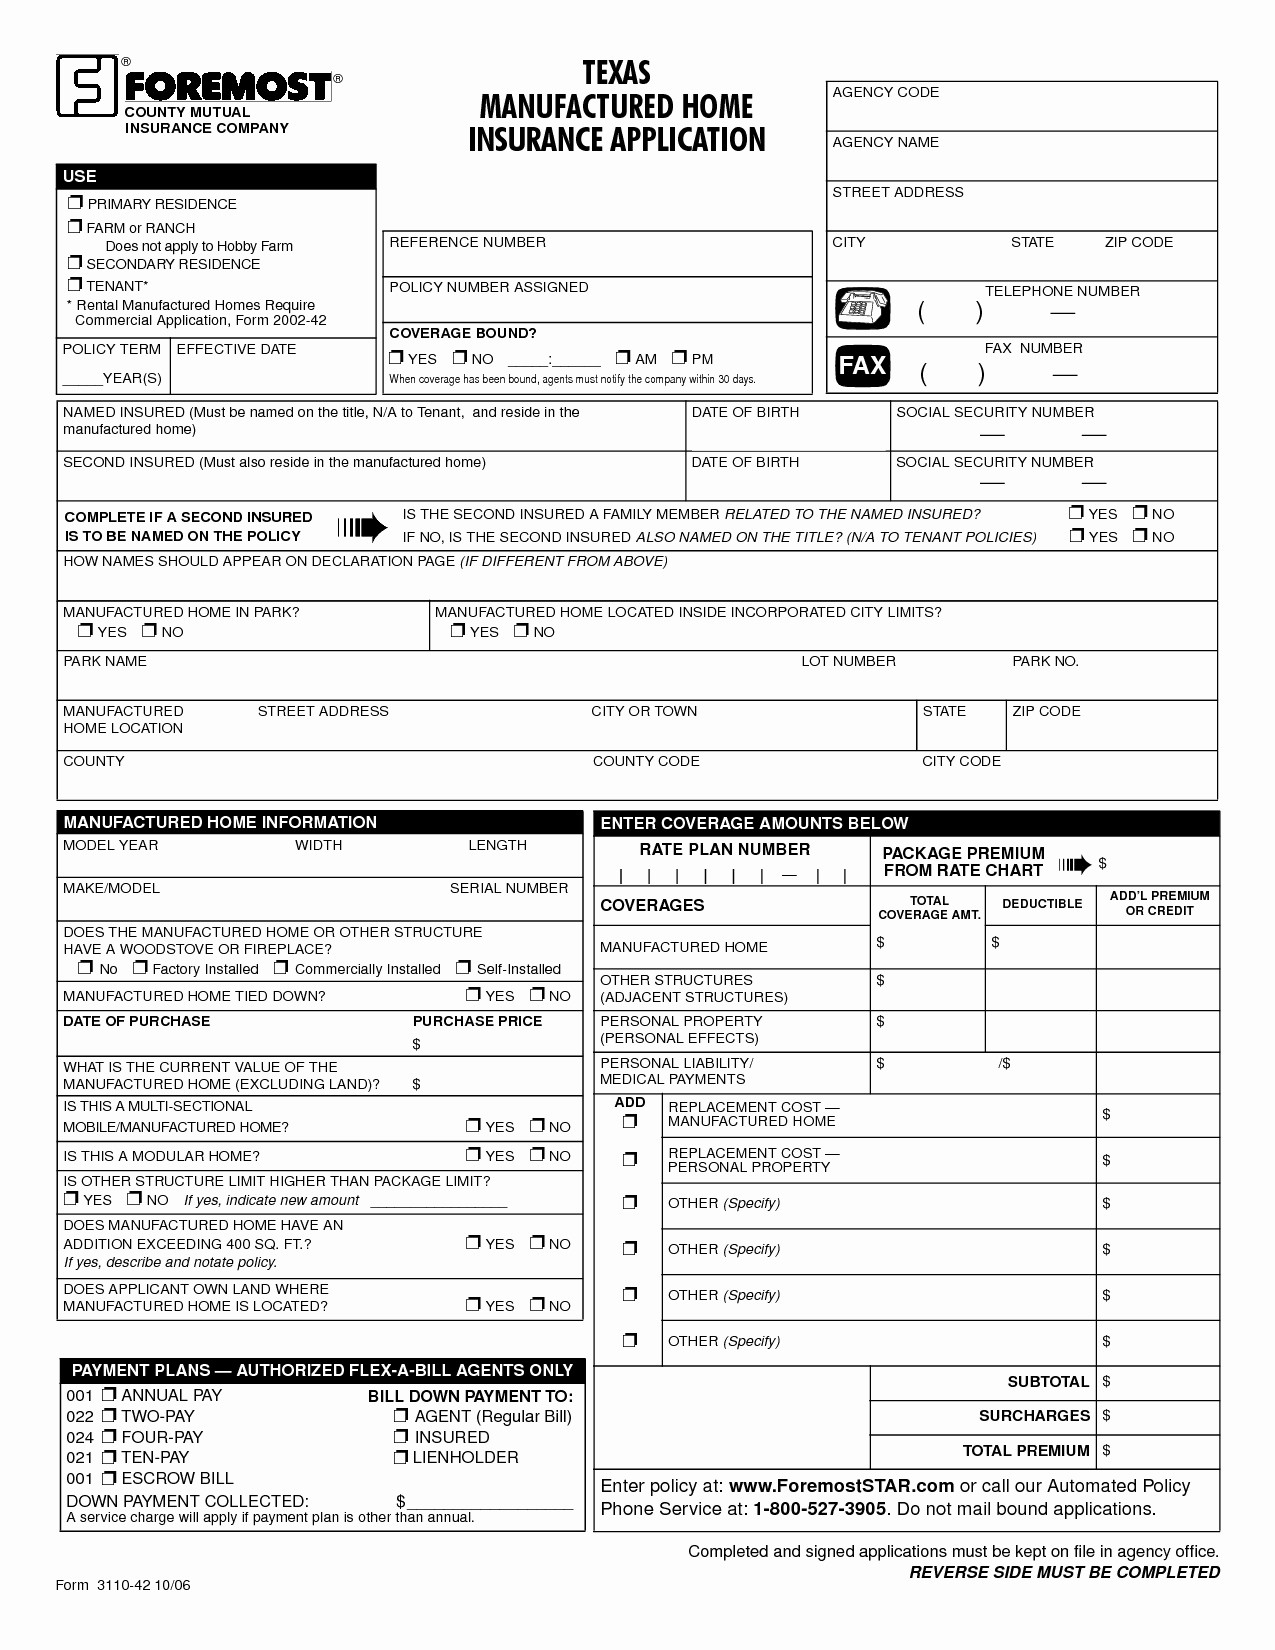 Homeowners Insurance Application Form Fresh Nice Home Document